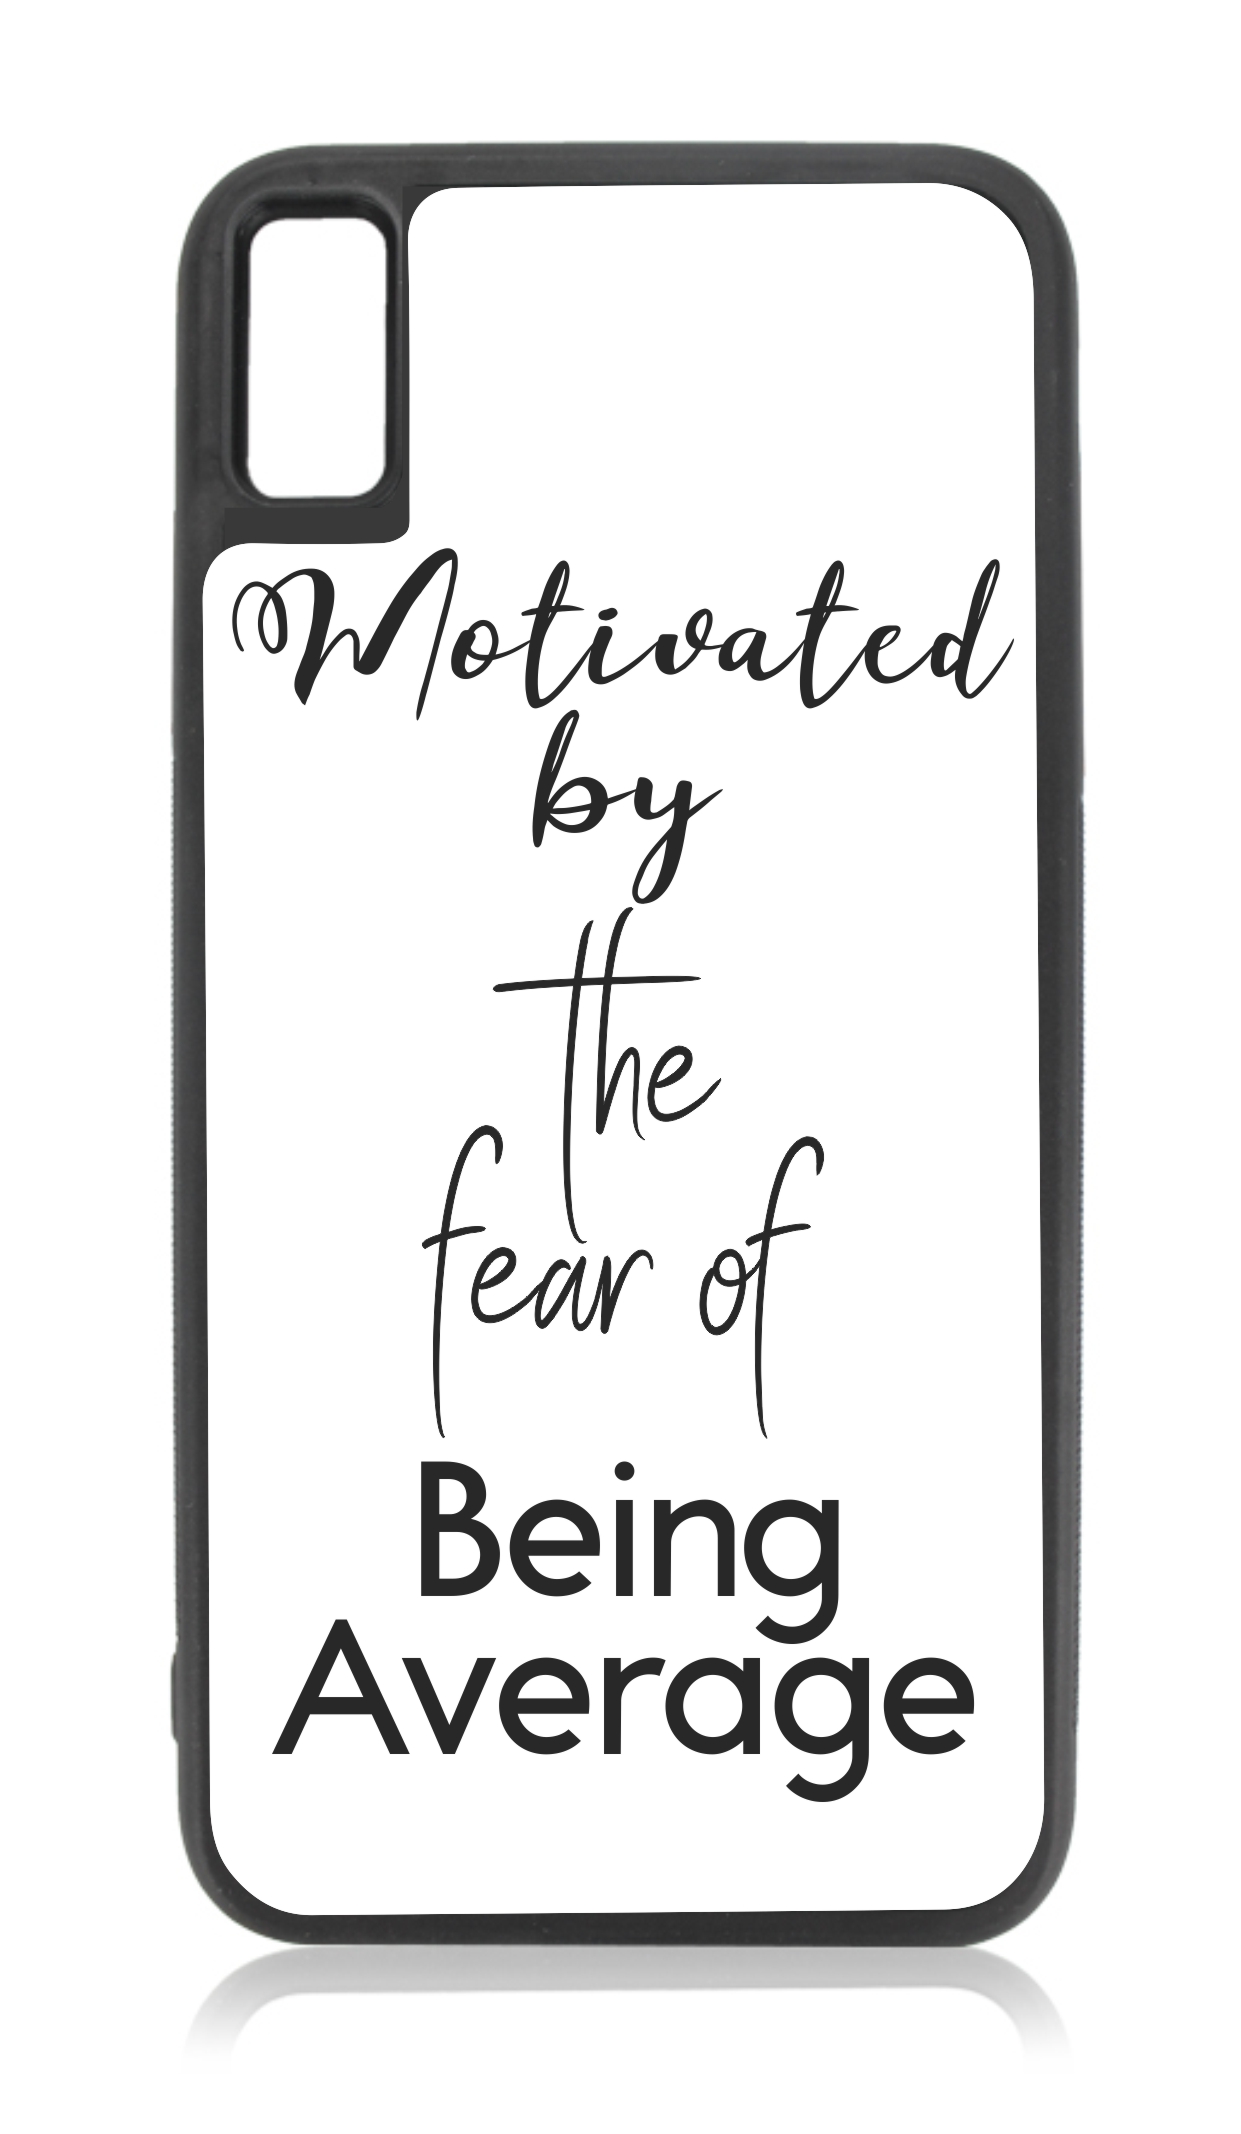 Average iPhone xr Quote Cases - xr Quote Case Case Novelty Black Rubber Case for iPhone XR - iPhone XR Phone Case - iPhone XR Accessories - image 1 of 1